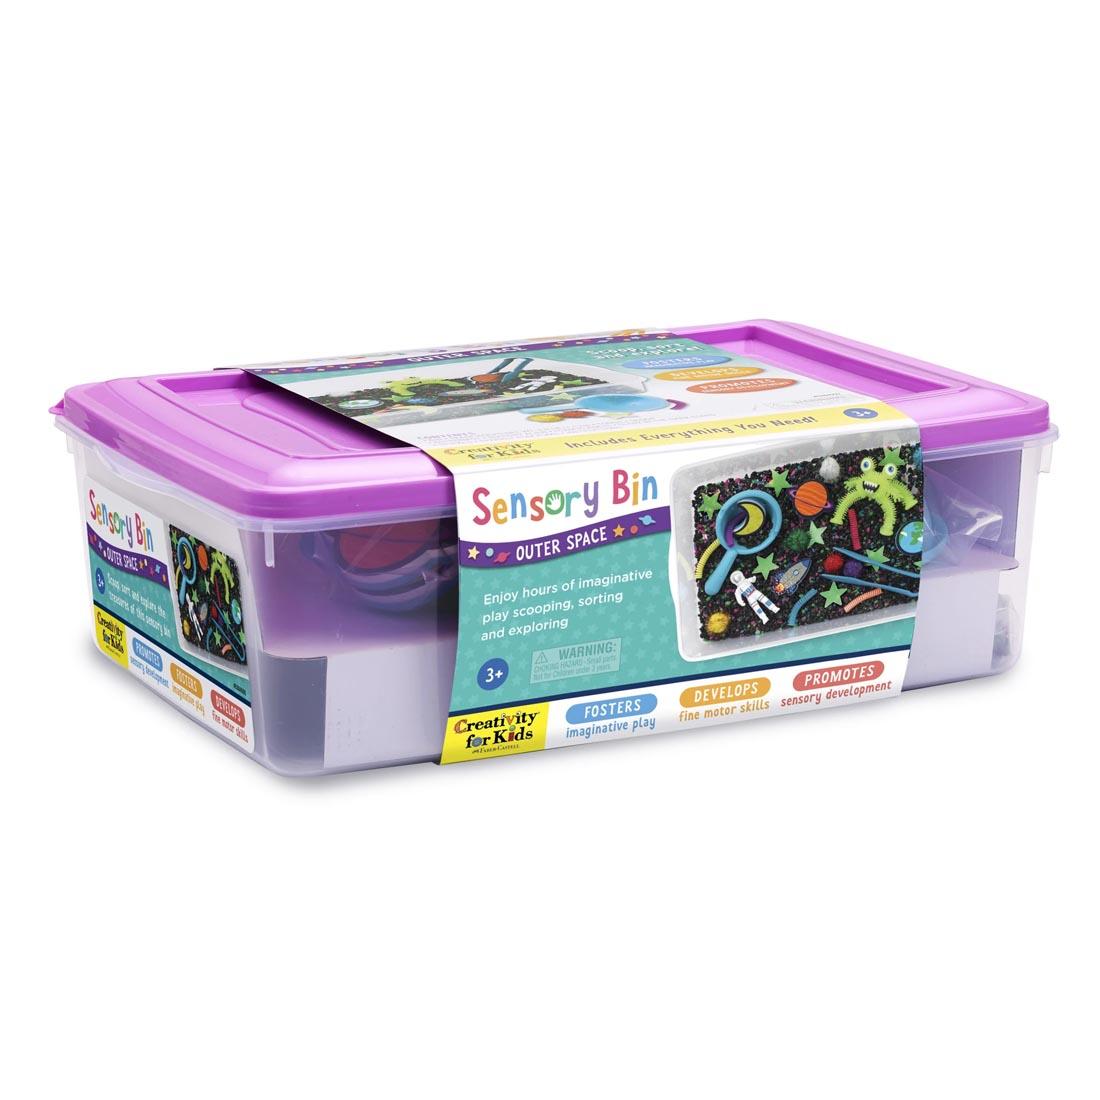 Outer Space Sensory Bin By Creativity For Kids